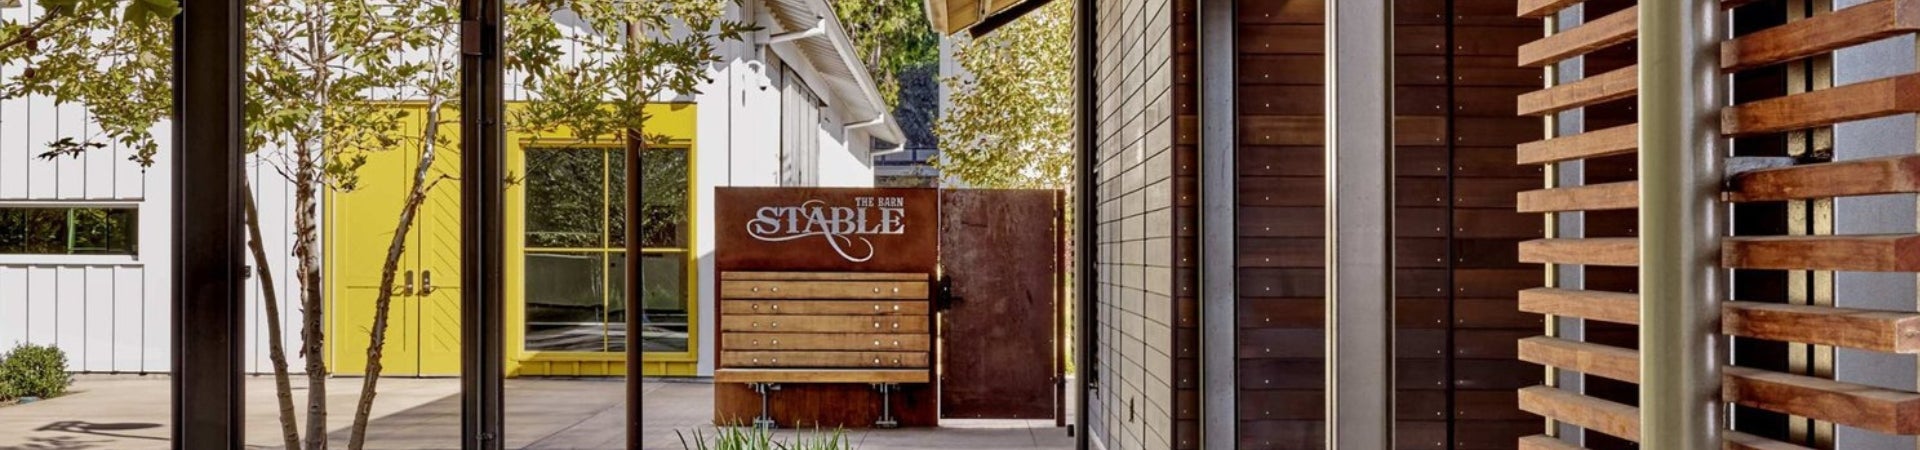 the stable outdoor entrance